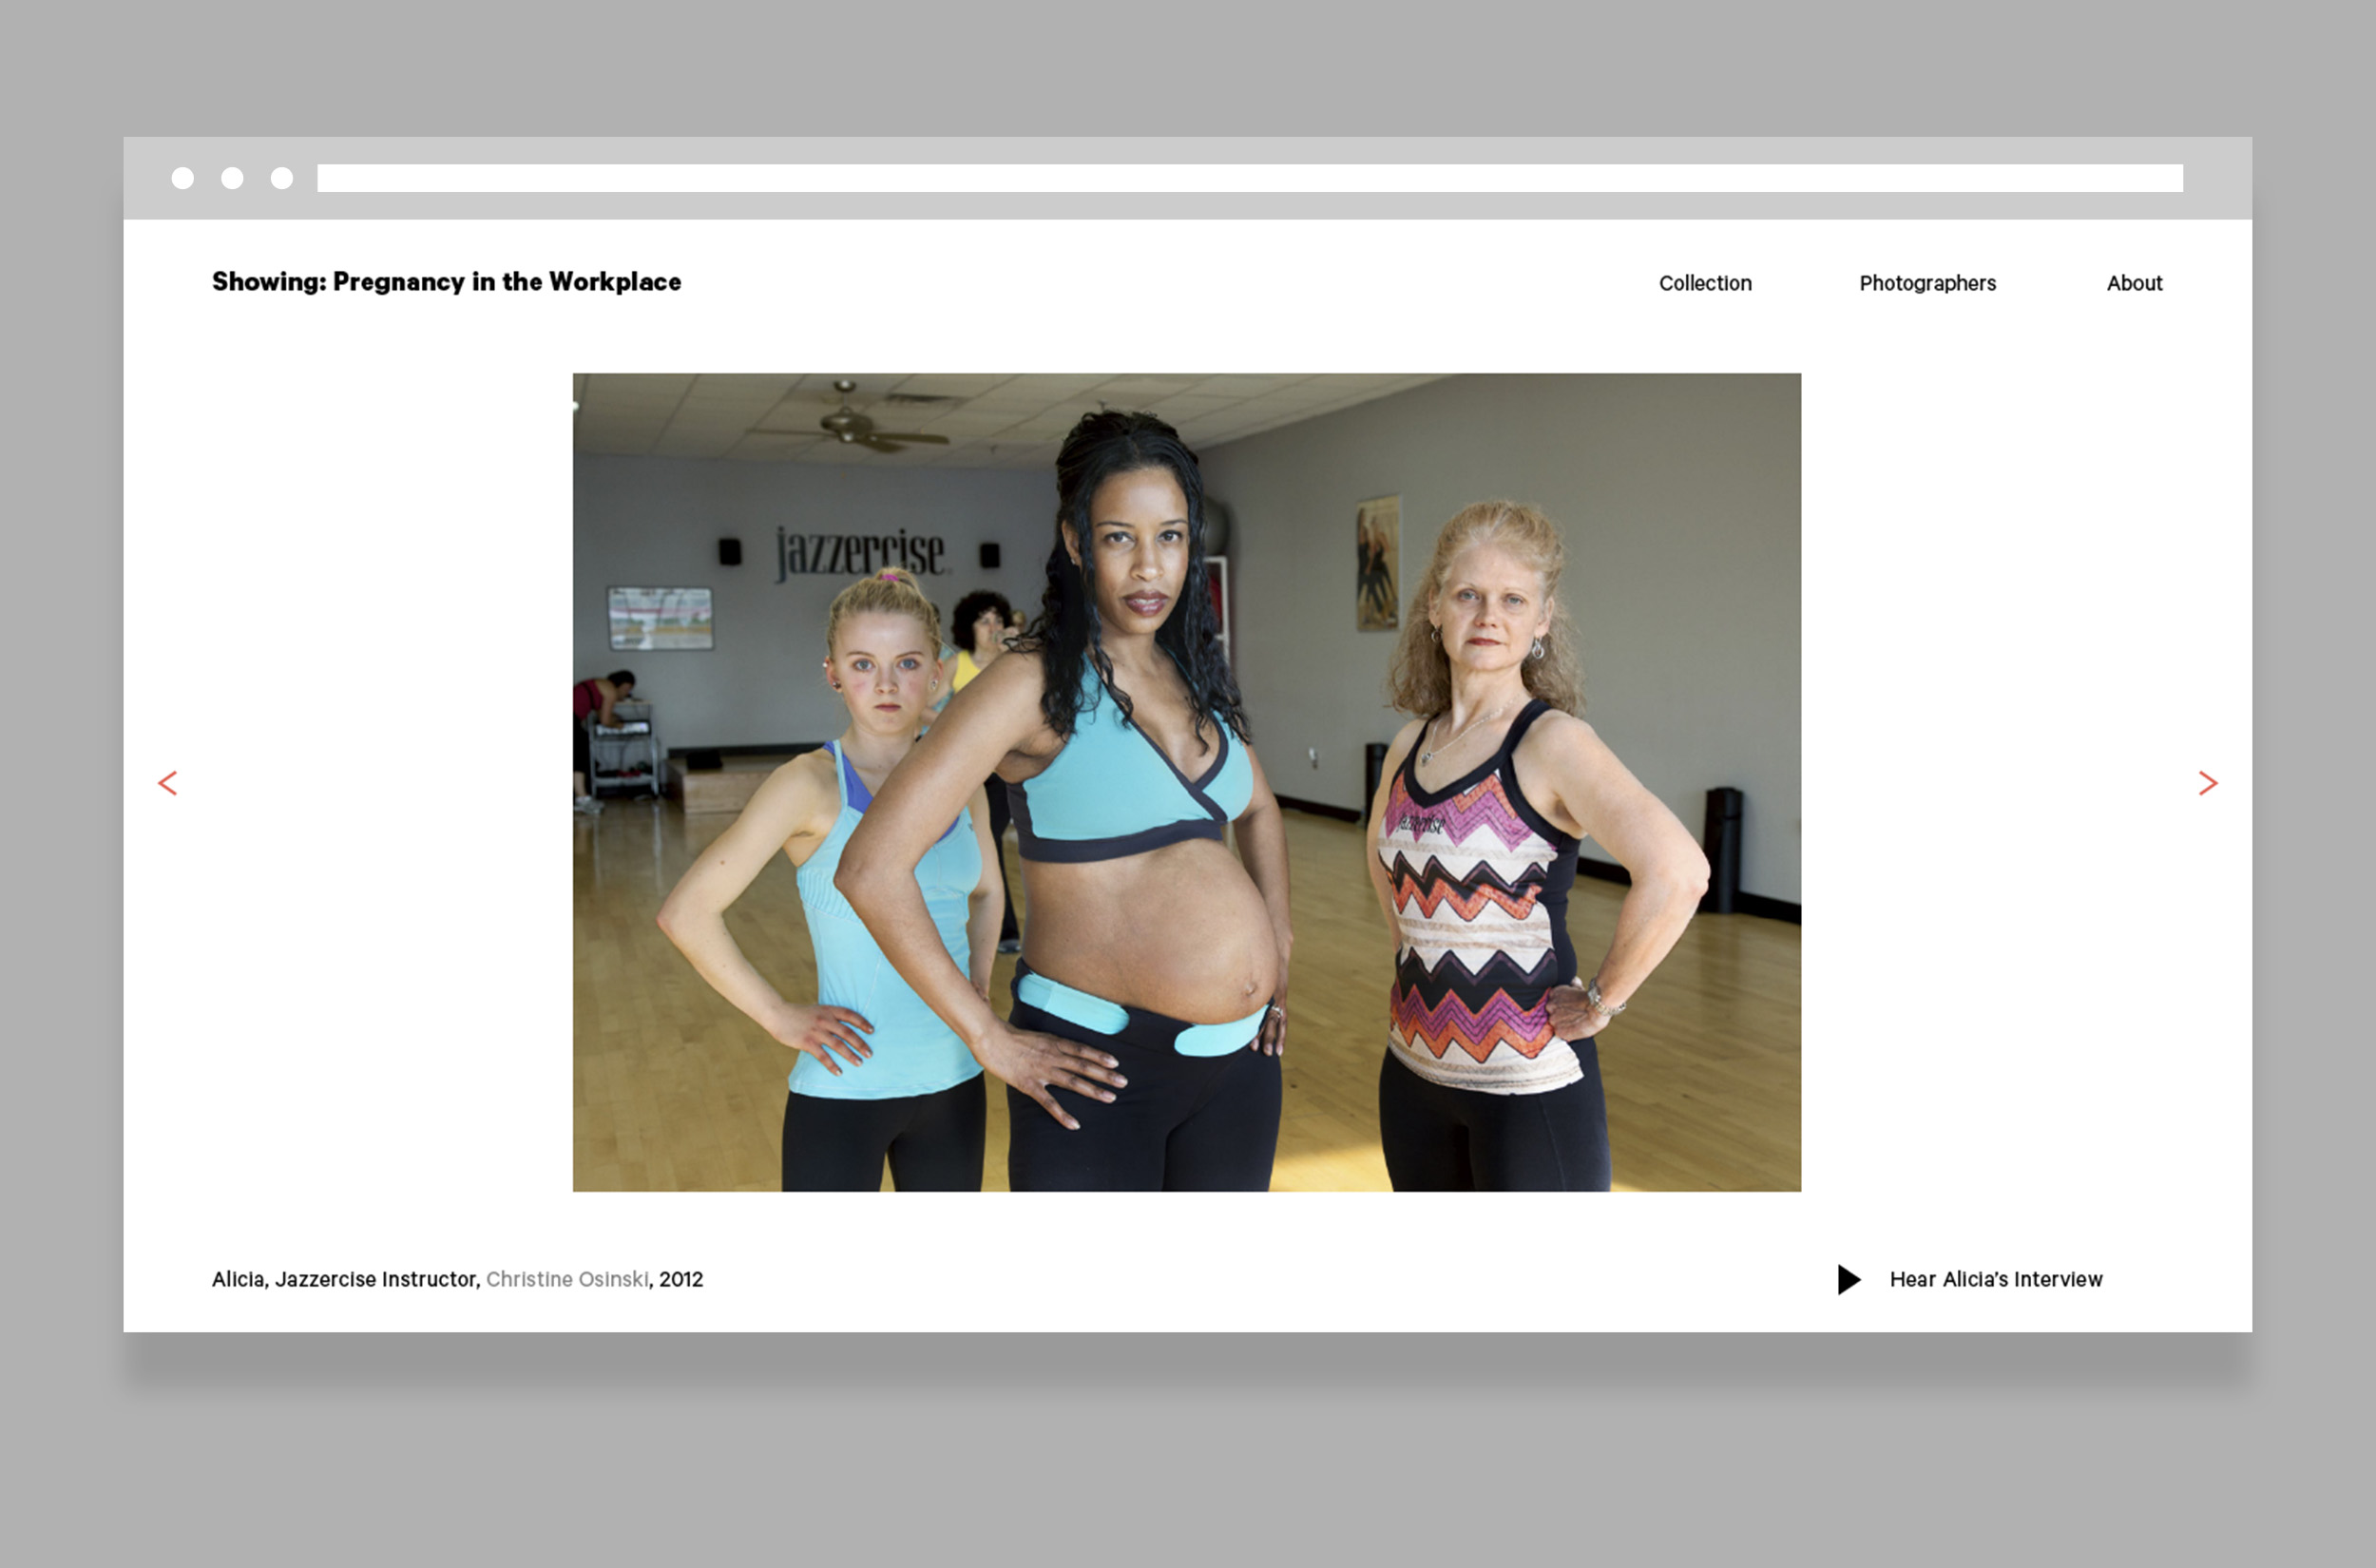 Mock-up of a webpage with a pregnant dancer posing with two other people in a jazzercise studio.